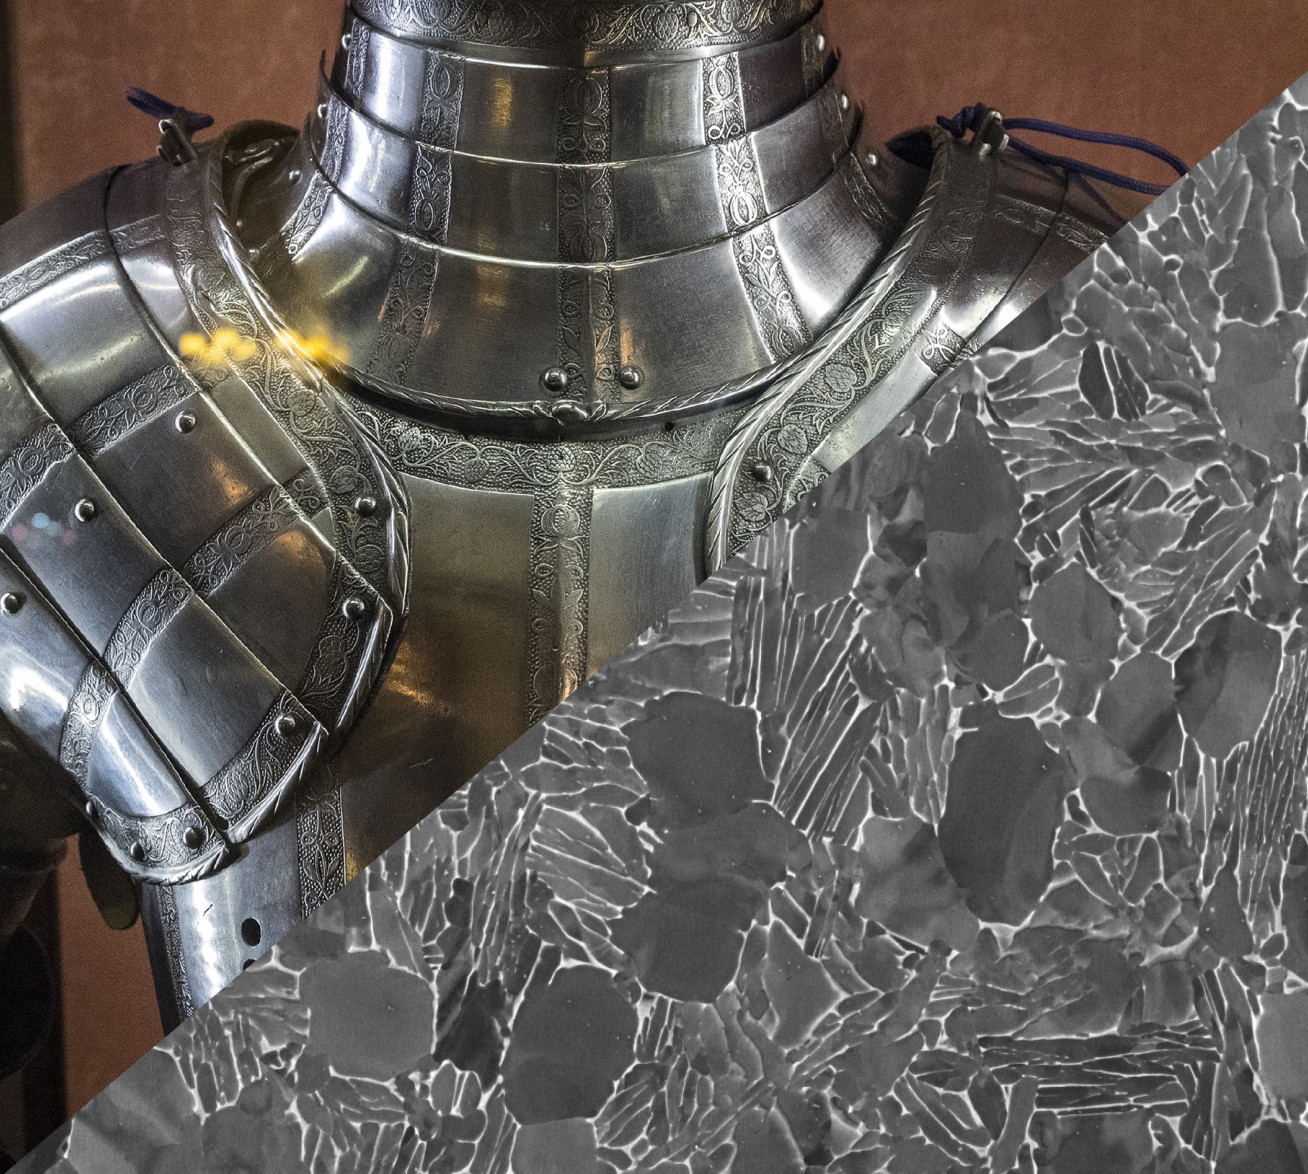 Composite image showing in top left sixteenth century armour and in bottom right an image of titanium alloy. The concept is progress in materials science.